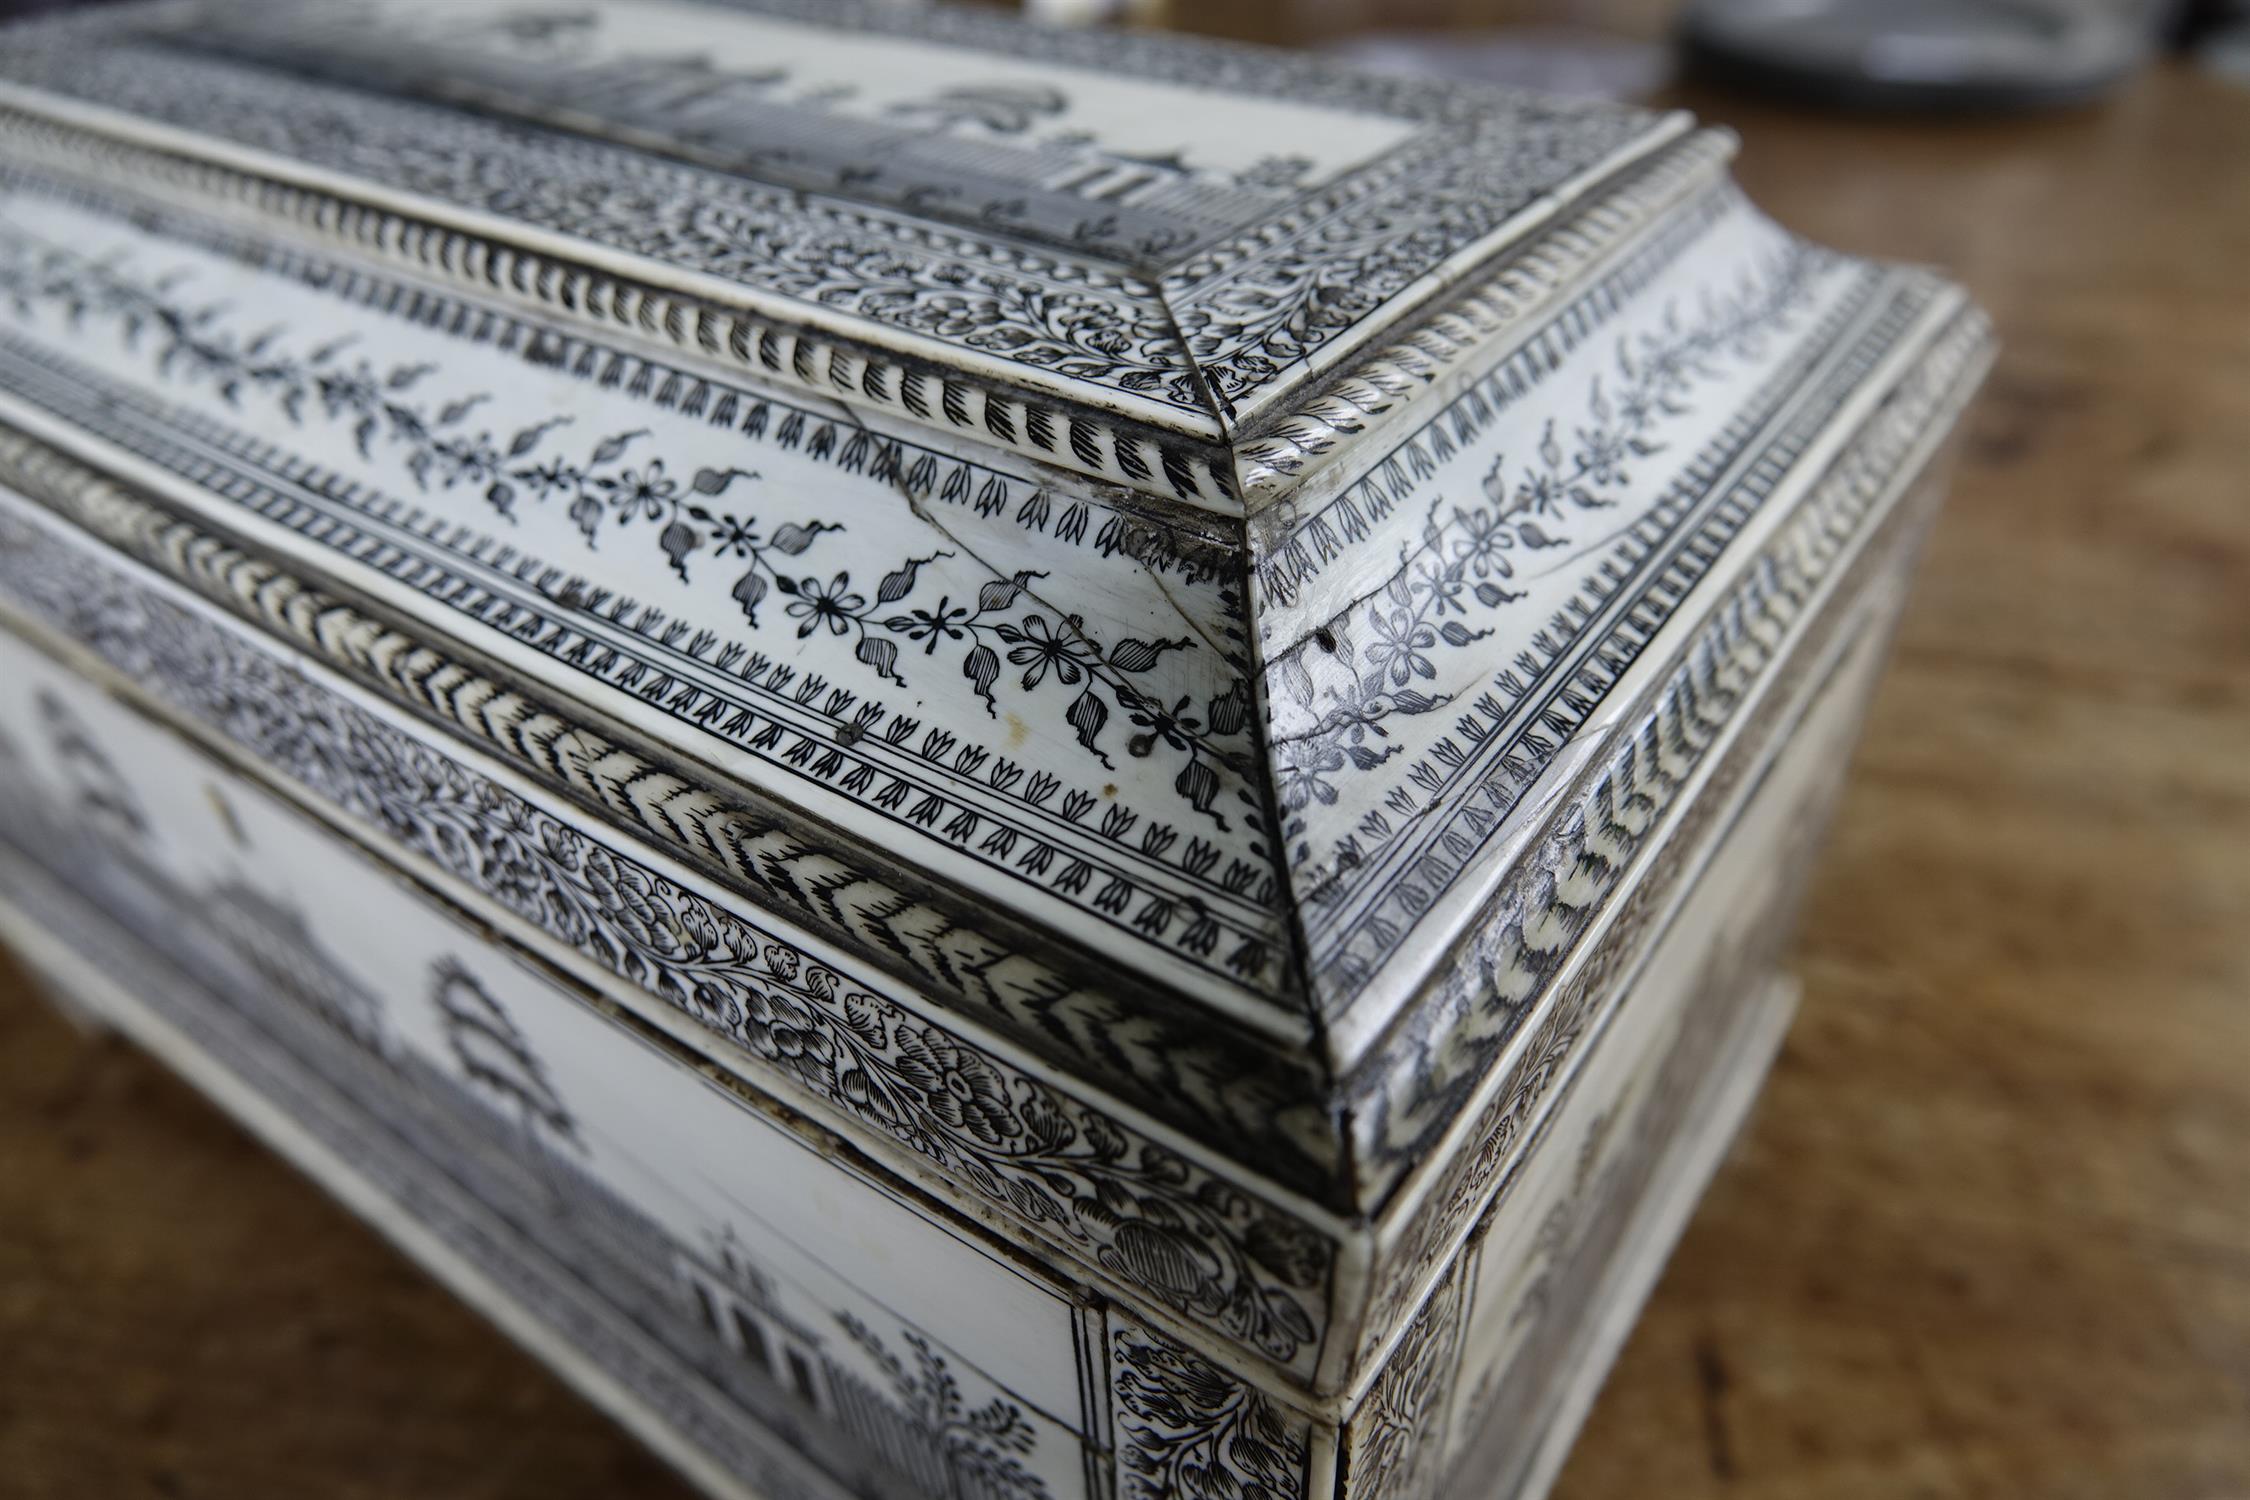 AN ANGLO-INDIAN VIZAGAPATAM TEA CASKET, c.1800, engraved overall in black ink with foliate borders - Image 14 of 22